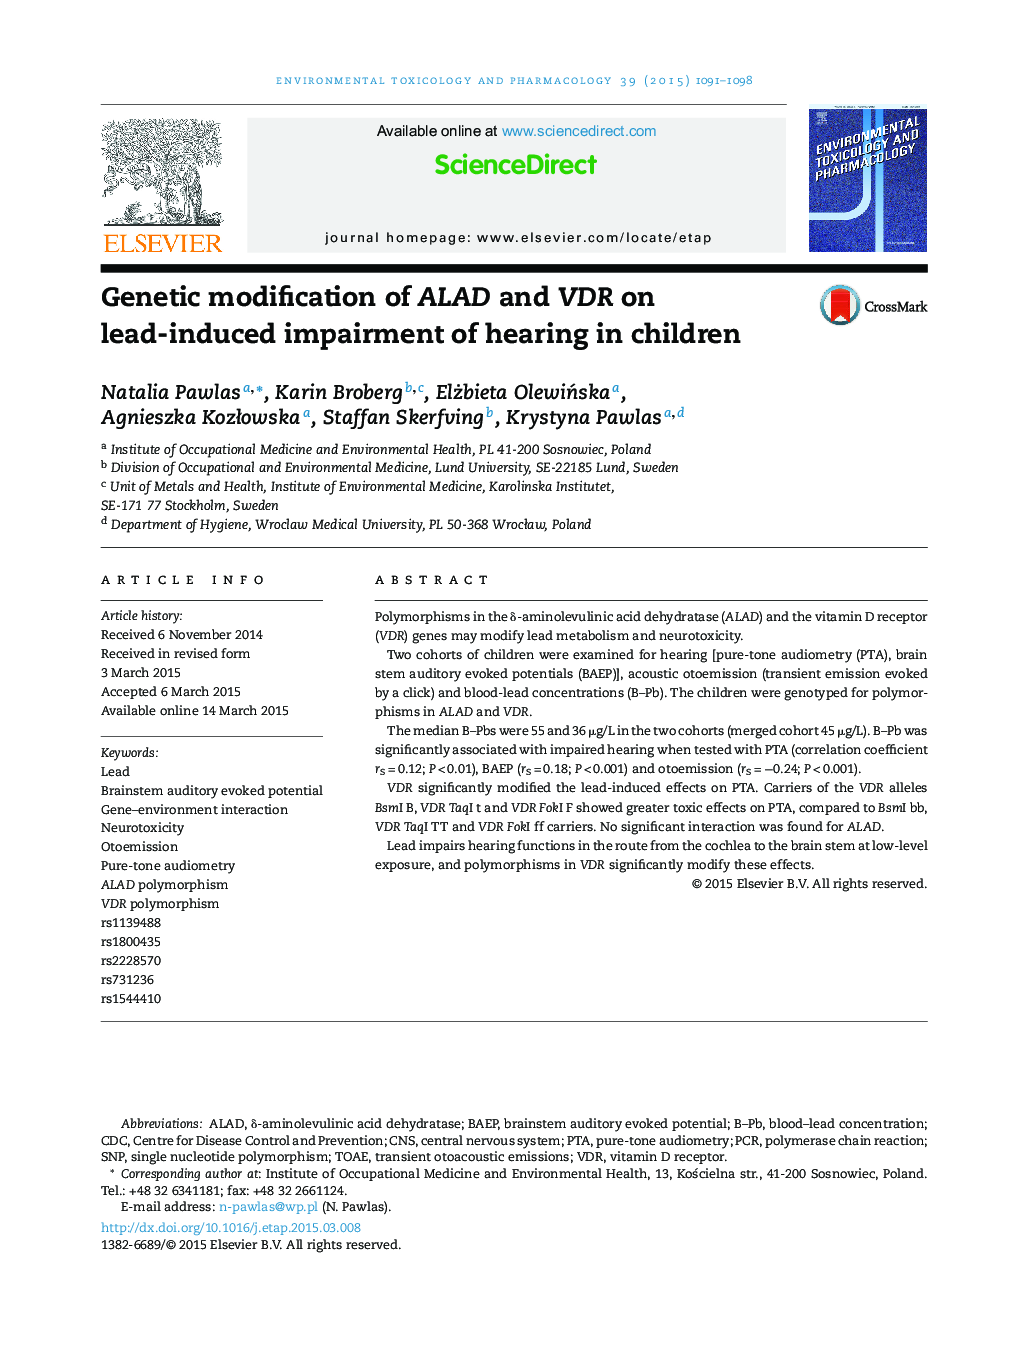 Genetic modification of ALAD and VDR on lead-induced impairment of hearing in children